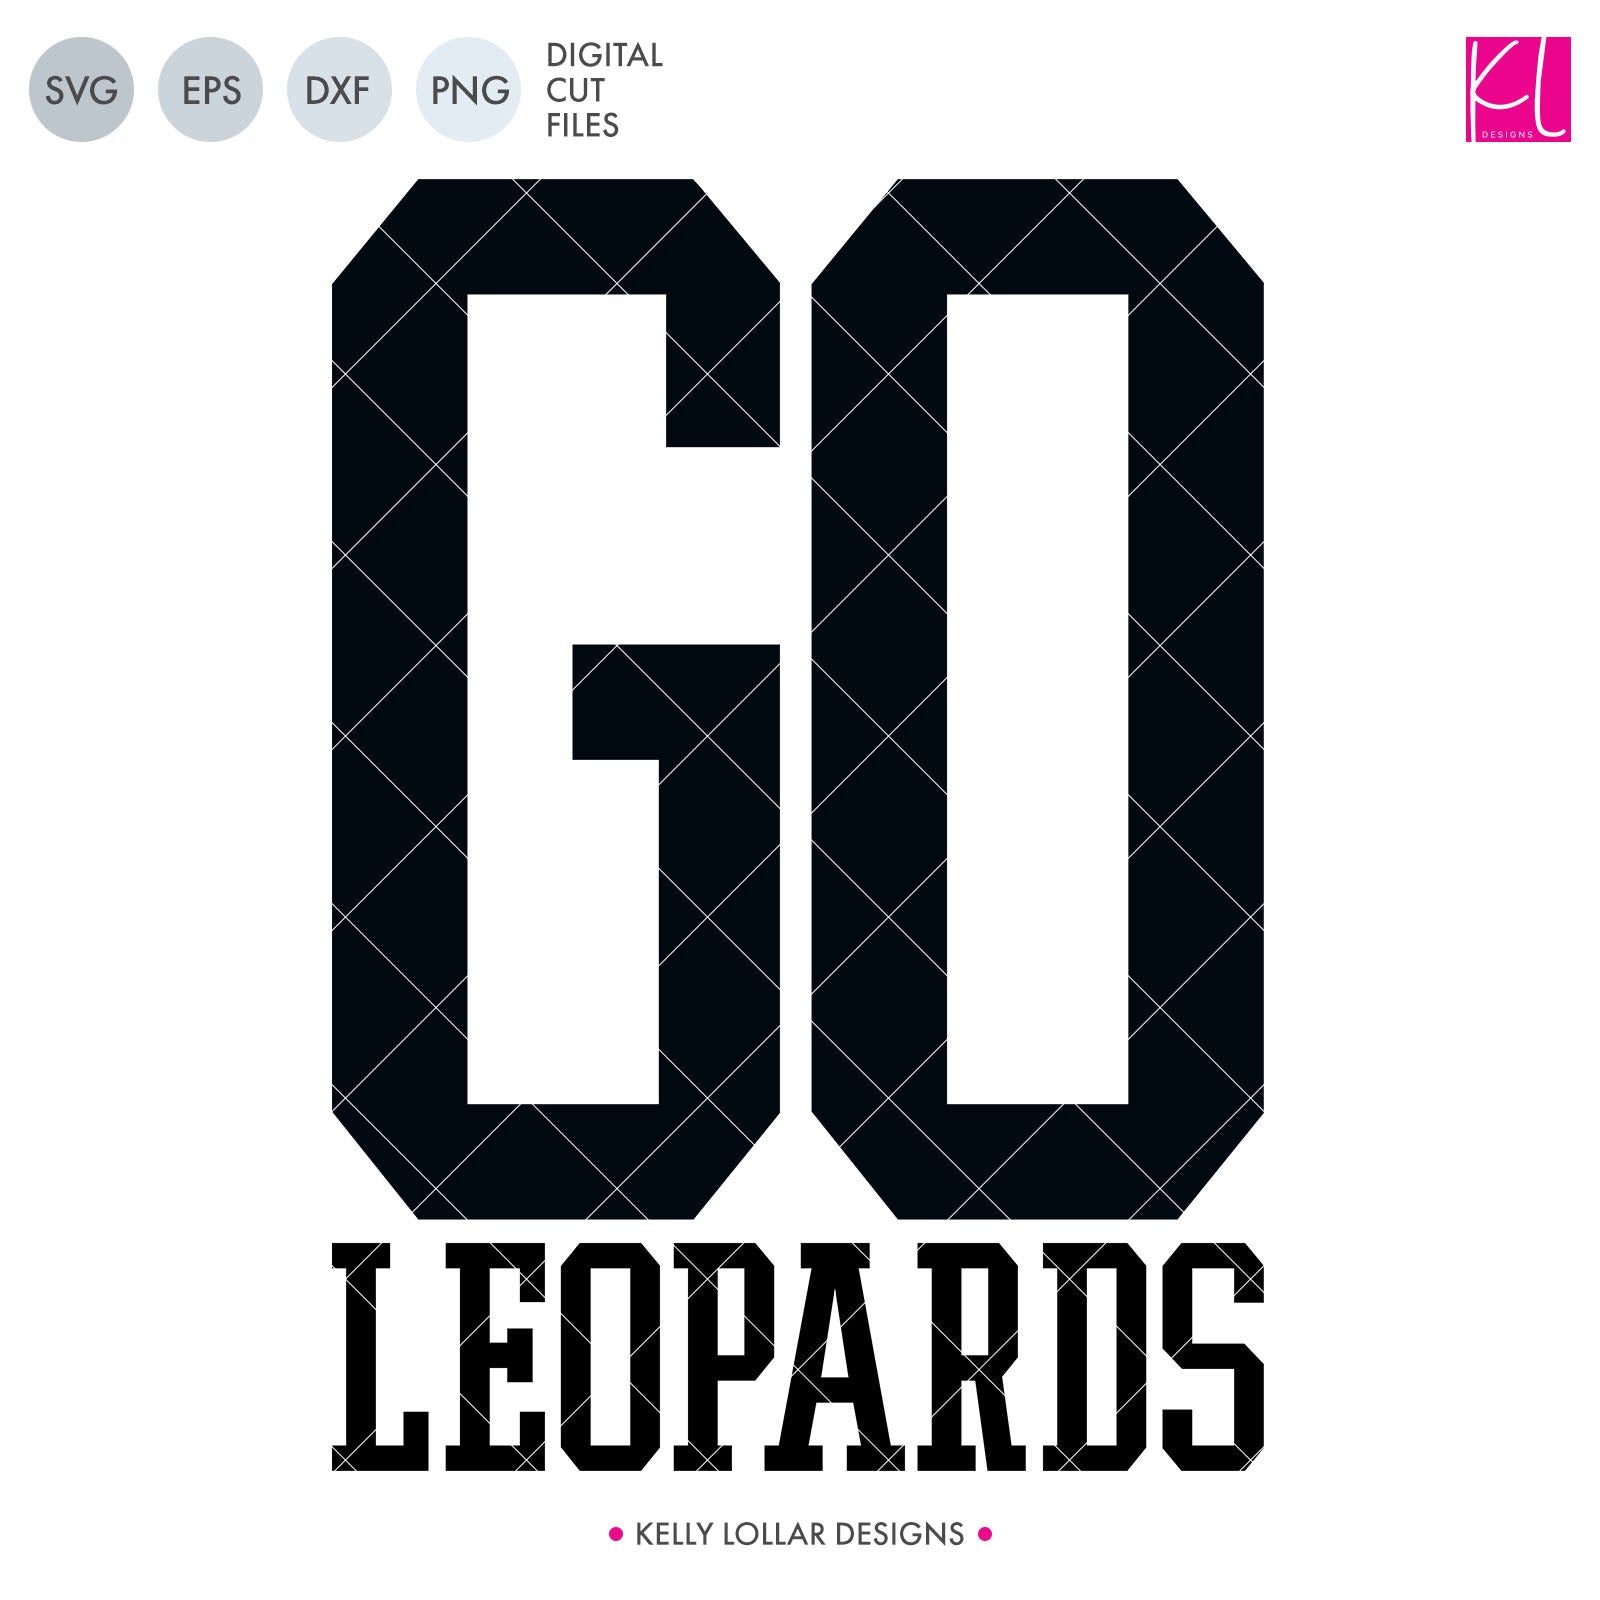 Leopard is Hunting Vector Bundle PNG Graphic by Design SVG · Creative  Fabrica